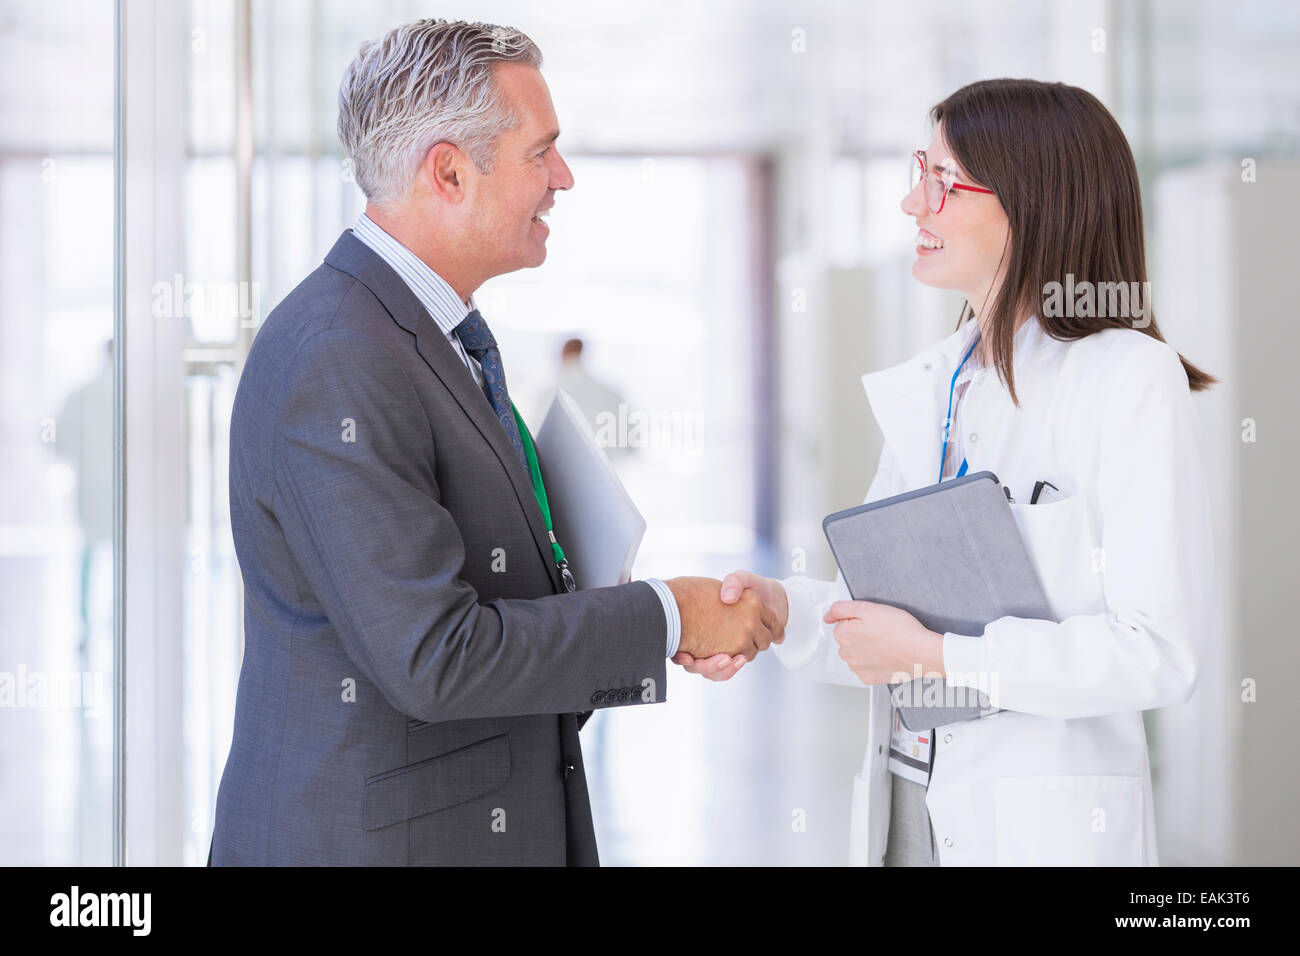 Scientist and businessman shaking hands in hallway Stock Photo